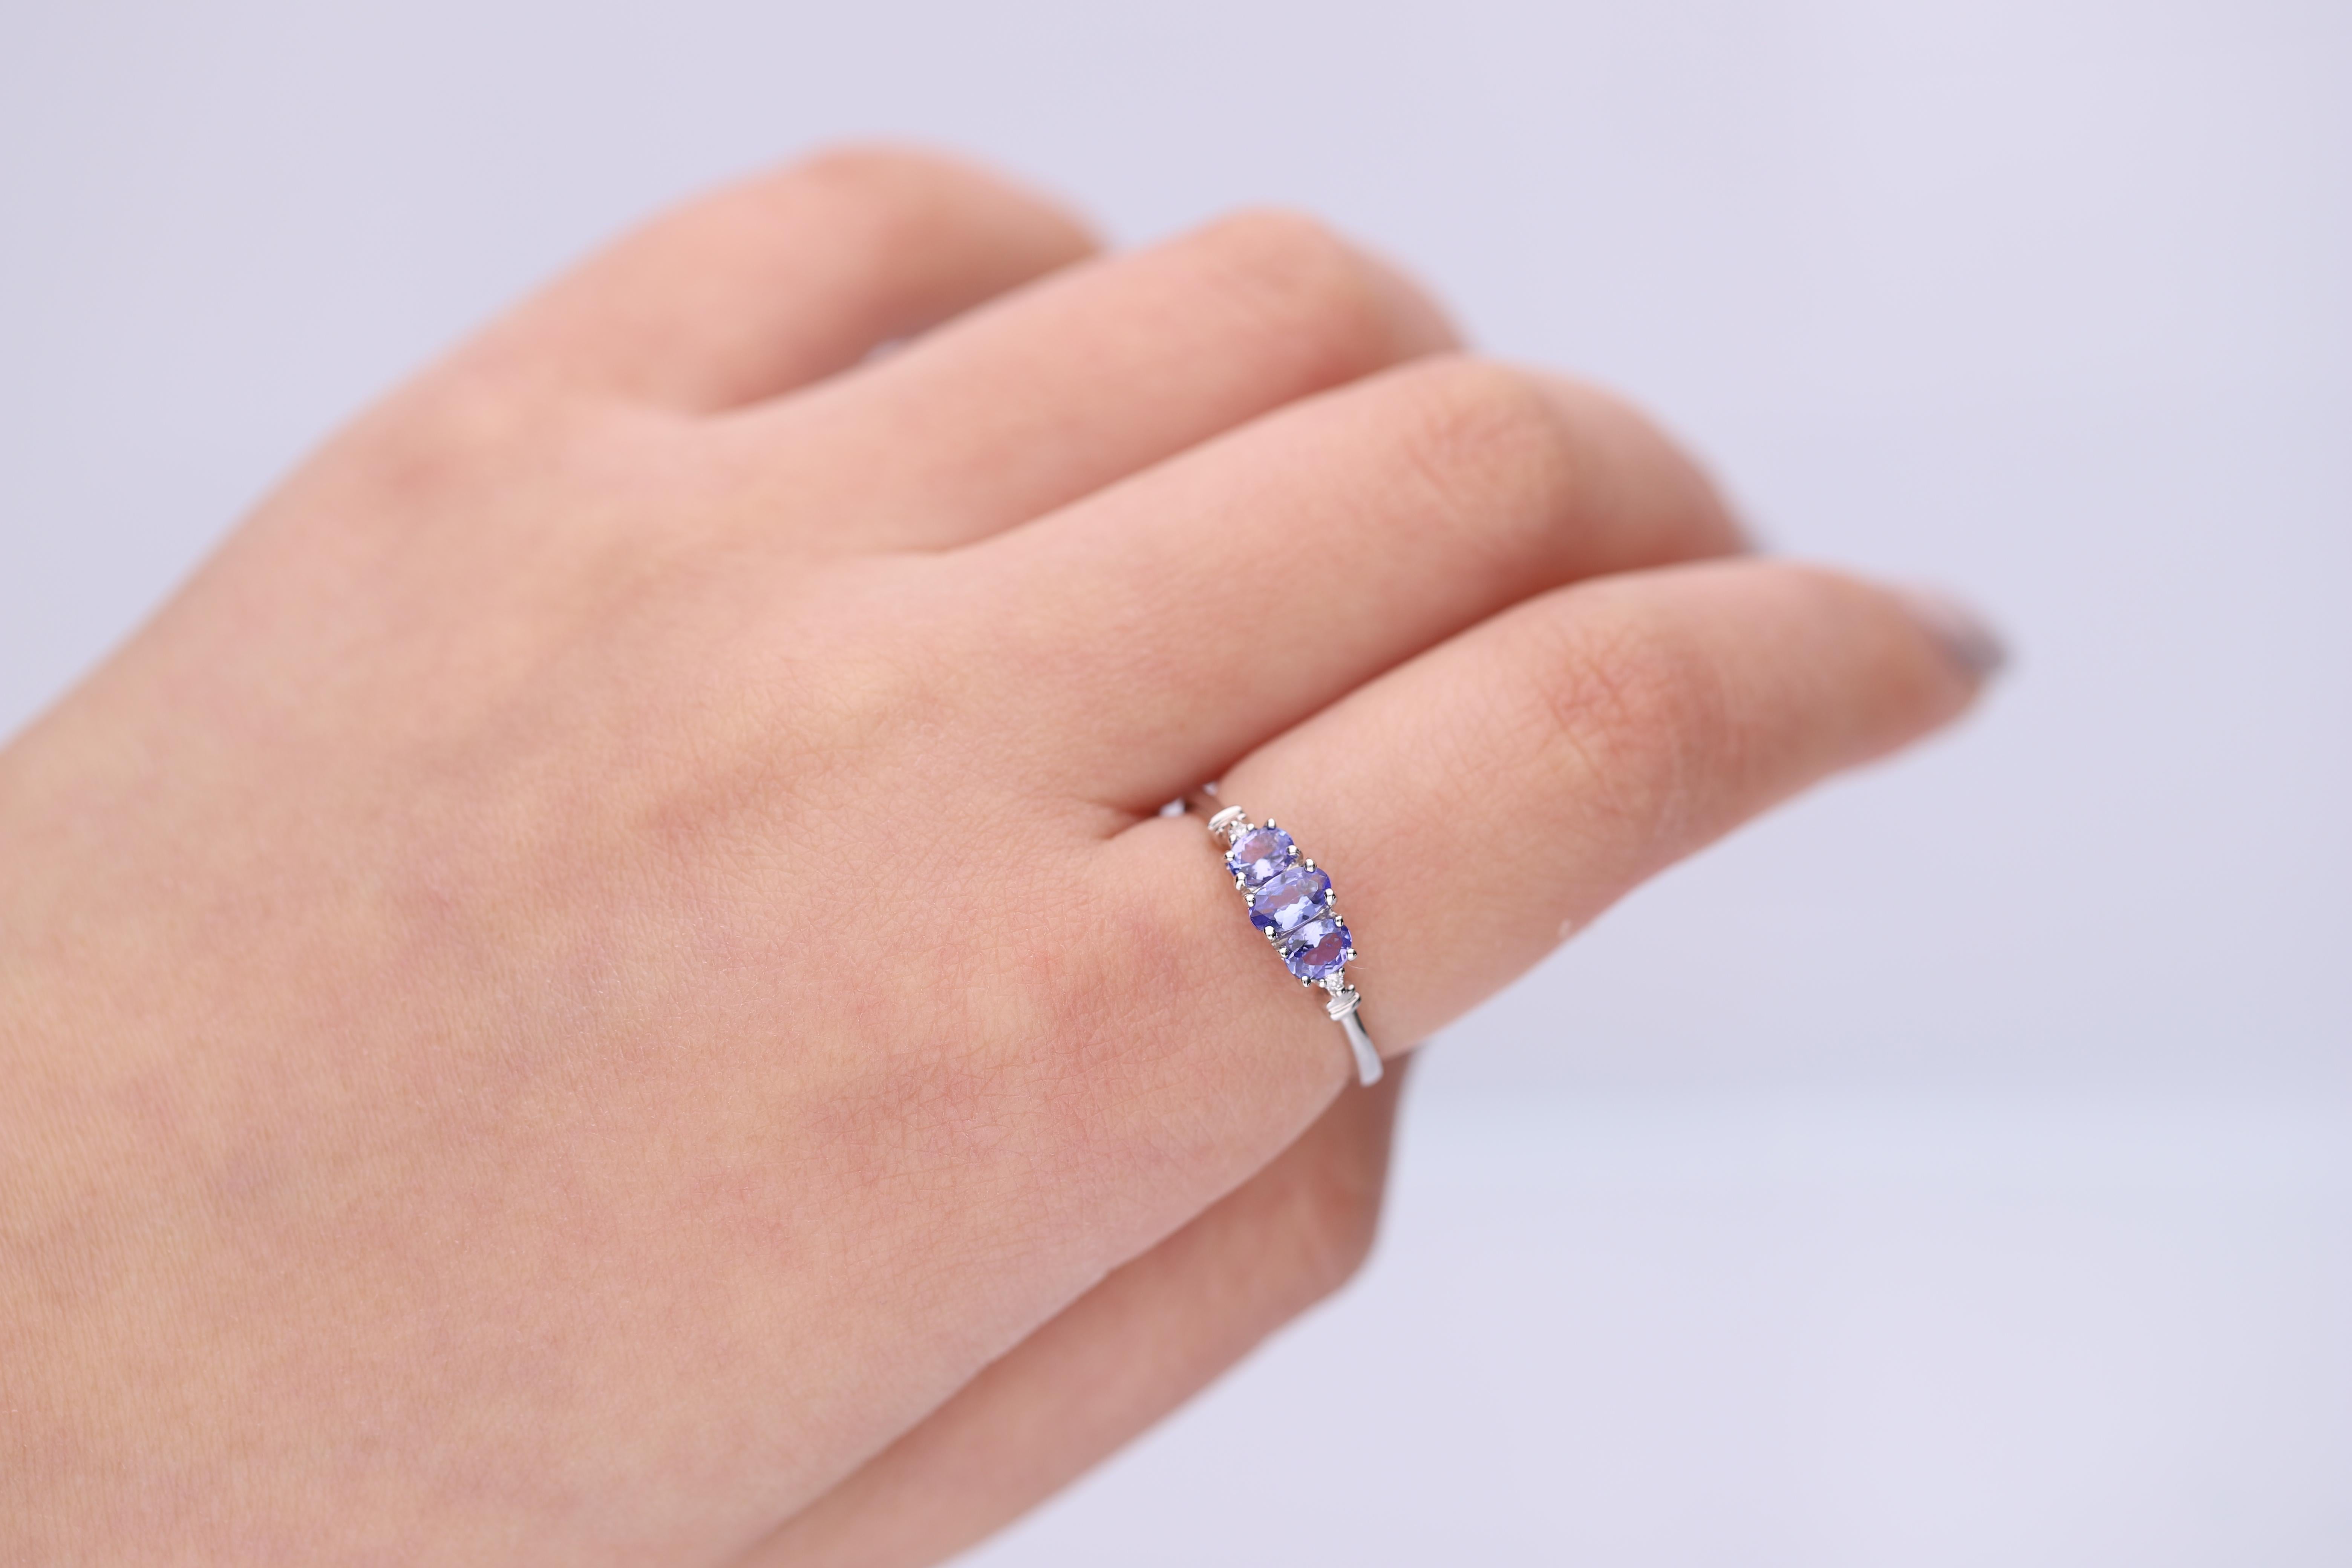 Decorate yourself in elegance with this Ring is crafted from 10-karat White Gold by Gin & Grace. This Ring is made up of 5x3 mm oval-cut (1 pcs) 0.24 carat,4x3 mm Oval-Cut (2 pcs) 0.36 carat Tanzanite and Round-cut White Diamond (2 Pcs) 0.02 Carat.